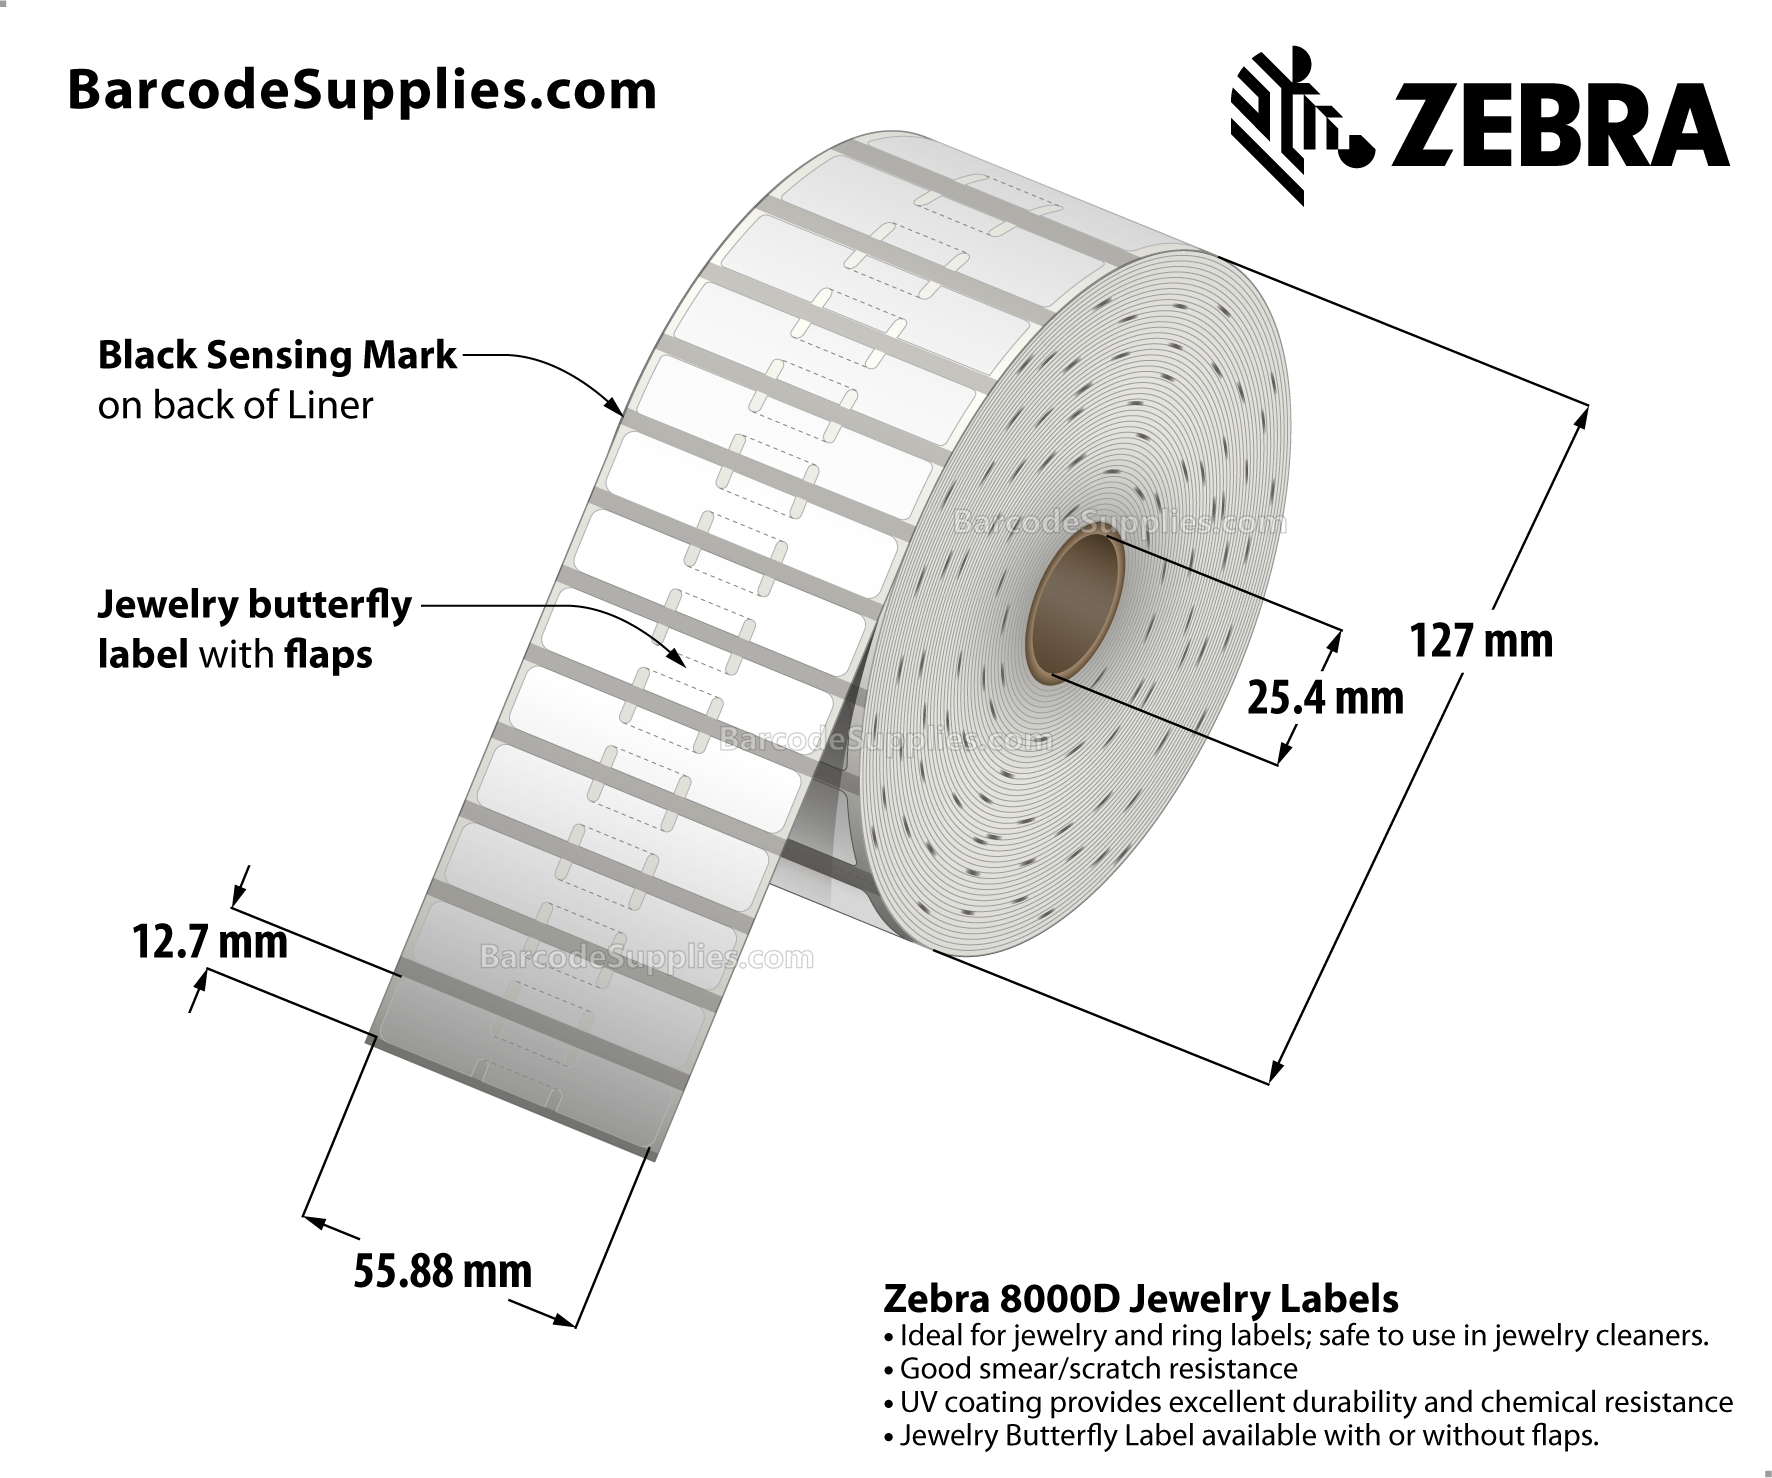 2.2 x 0.5 Direct Thermal White 8000D Jewelry (Jewelry Butterfly Label with flaps) Labels With Permanent Adhesive - Black mark sensing - Not Perforated - 3510 Labels Per Roll - Carton Of 6 Rolls - 21060 Labels Total - MPN: 10010065